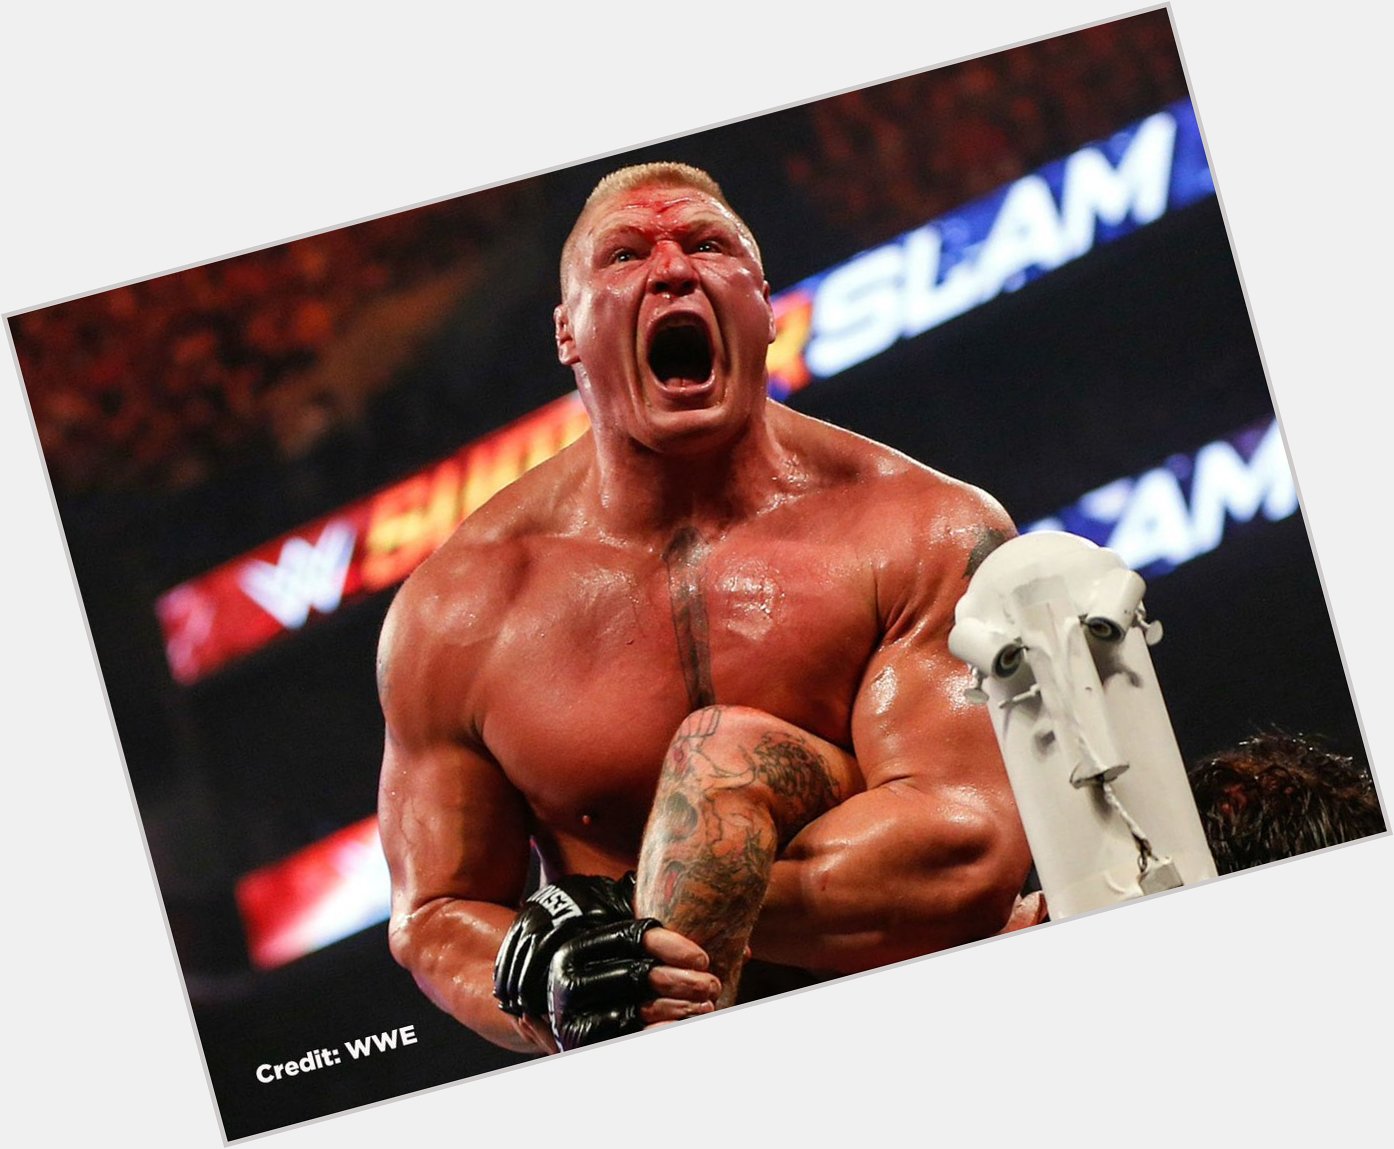 Happy 43rd birthday to the Beast, Brock Lesnar! 